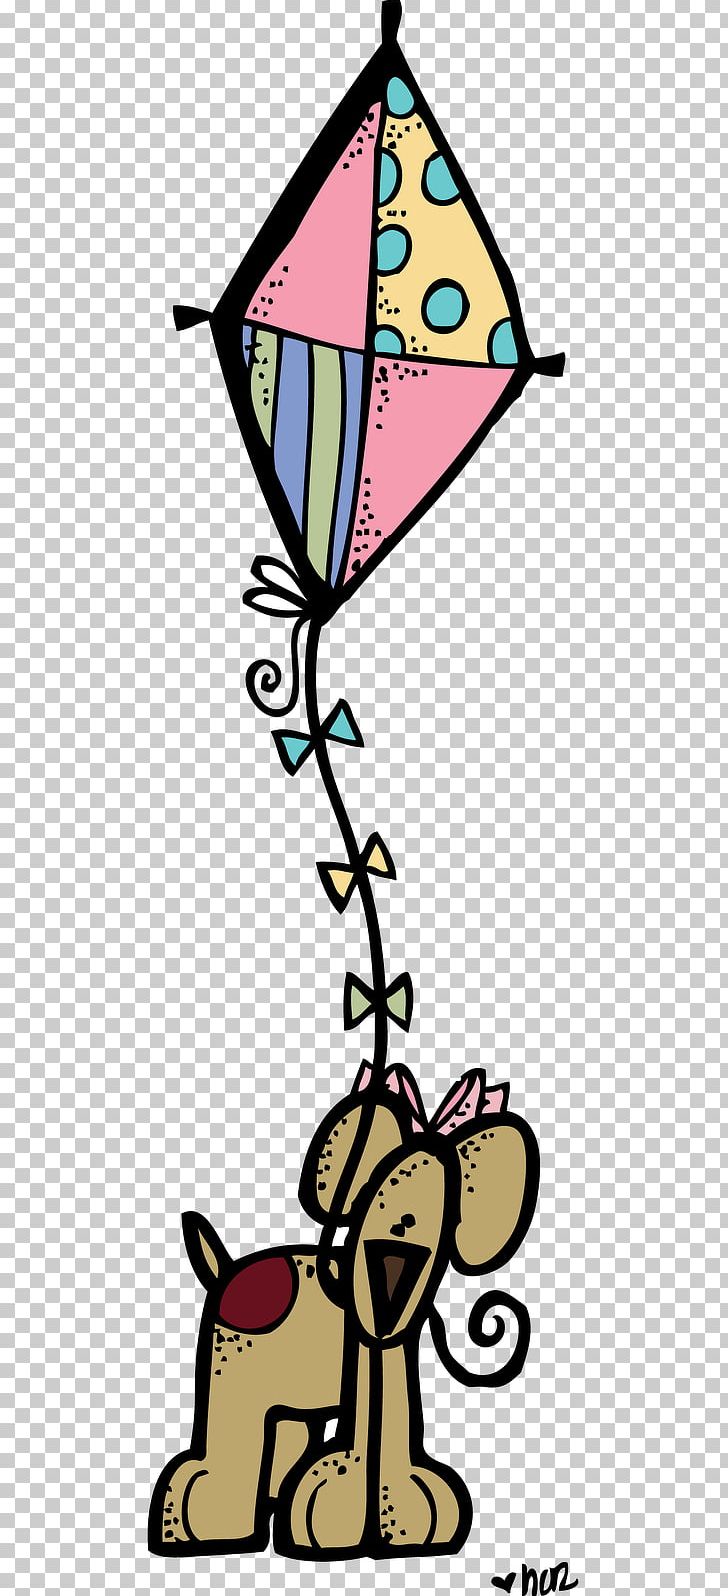 Your Puppy Kite PNG, Clipart, Area, Art, Artwork, Caricature, Cartoon Free PNG Download